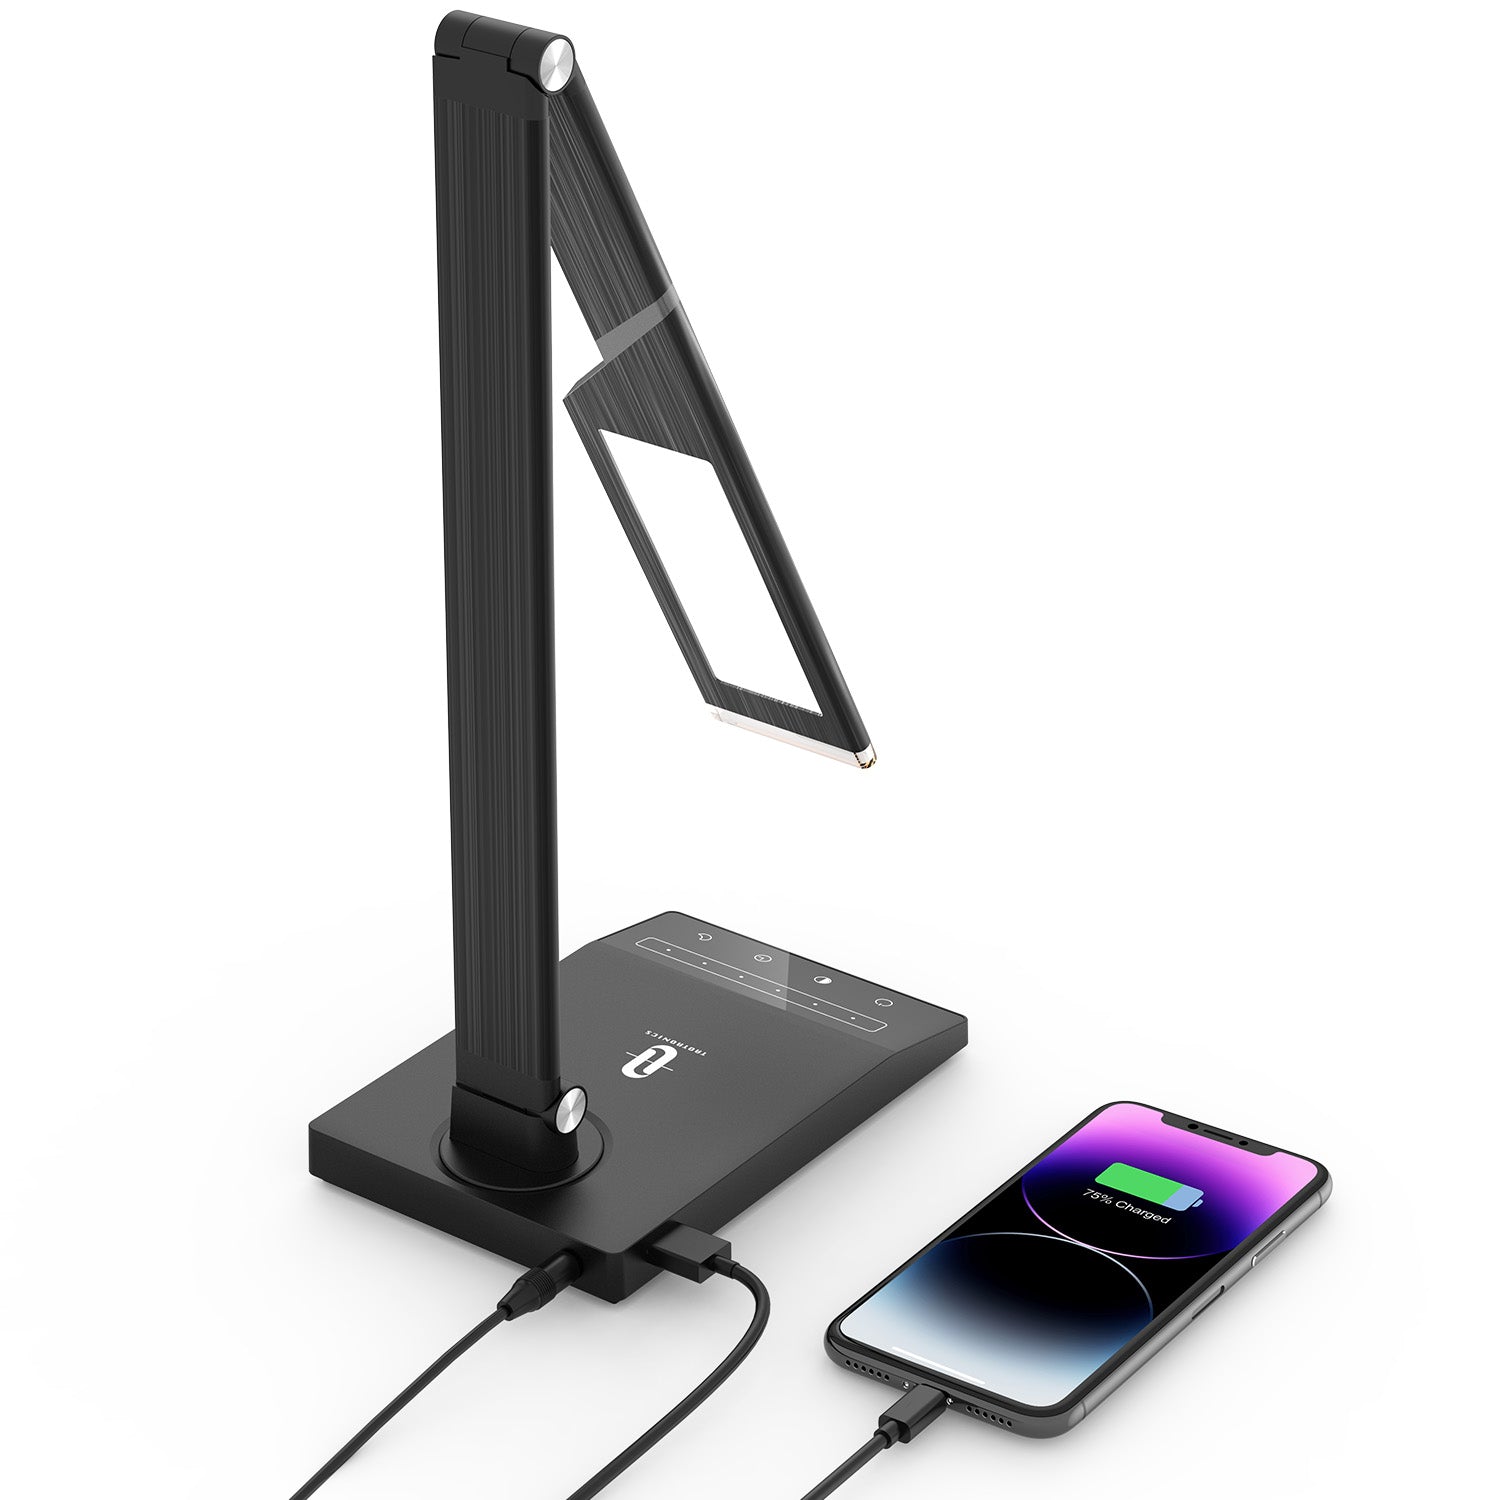 TapTronics DL048 LED Desk Lamp with Fast Wireless Charger&5V/1A USB Port